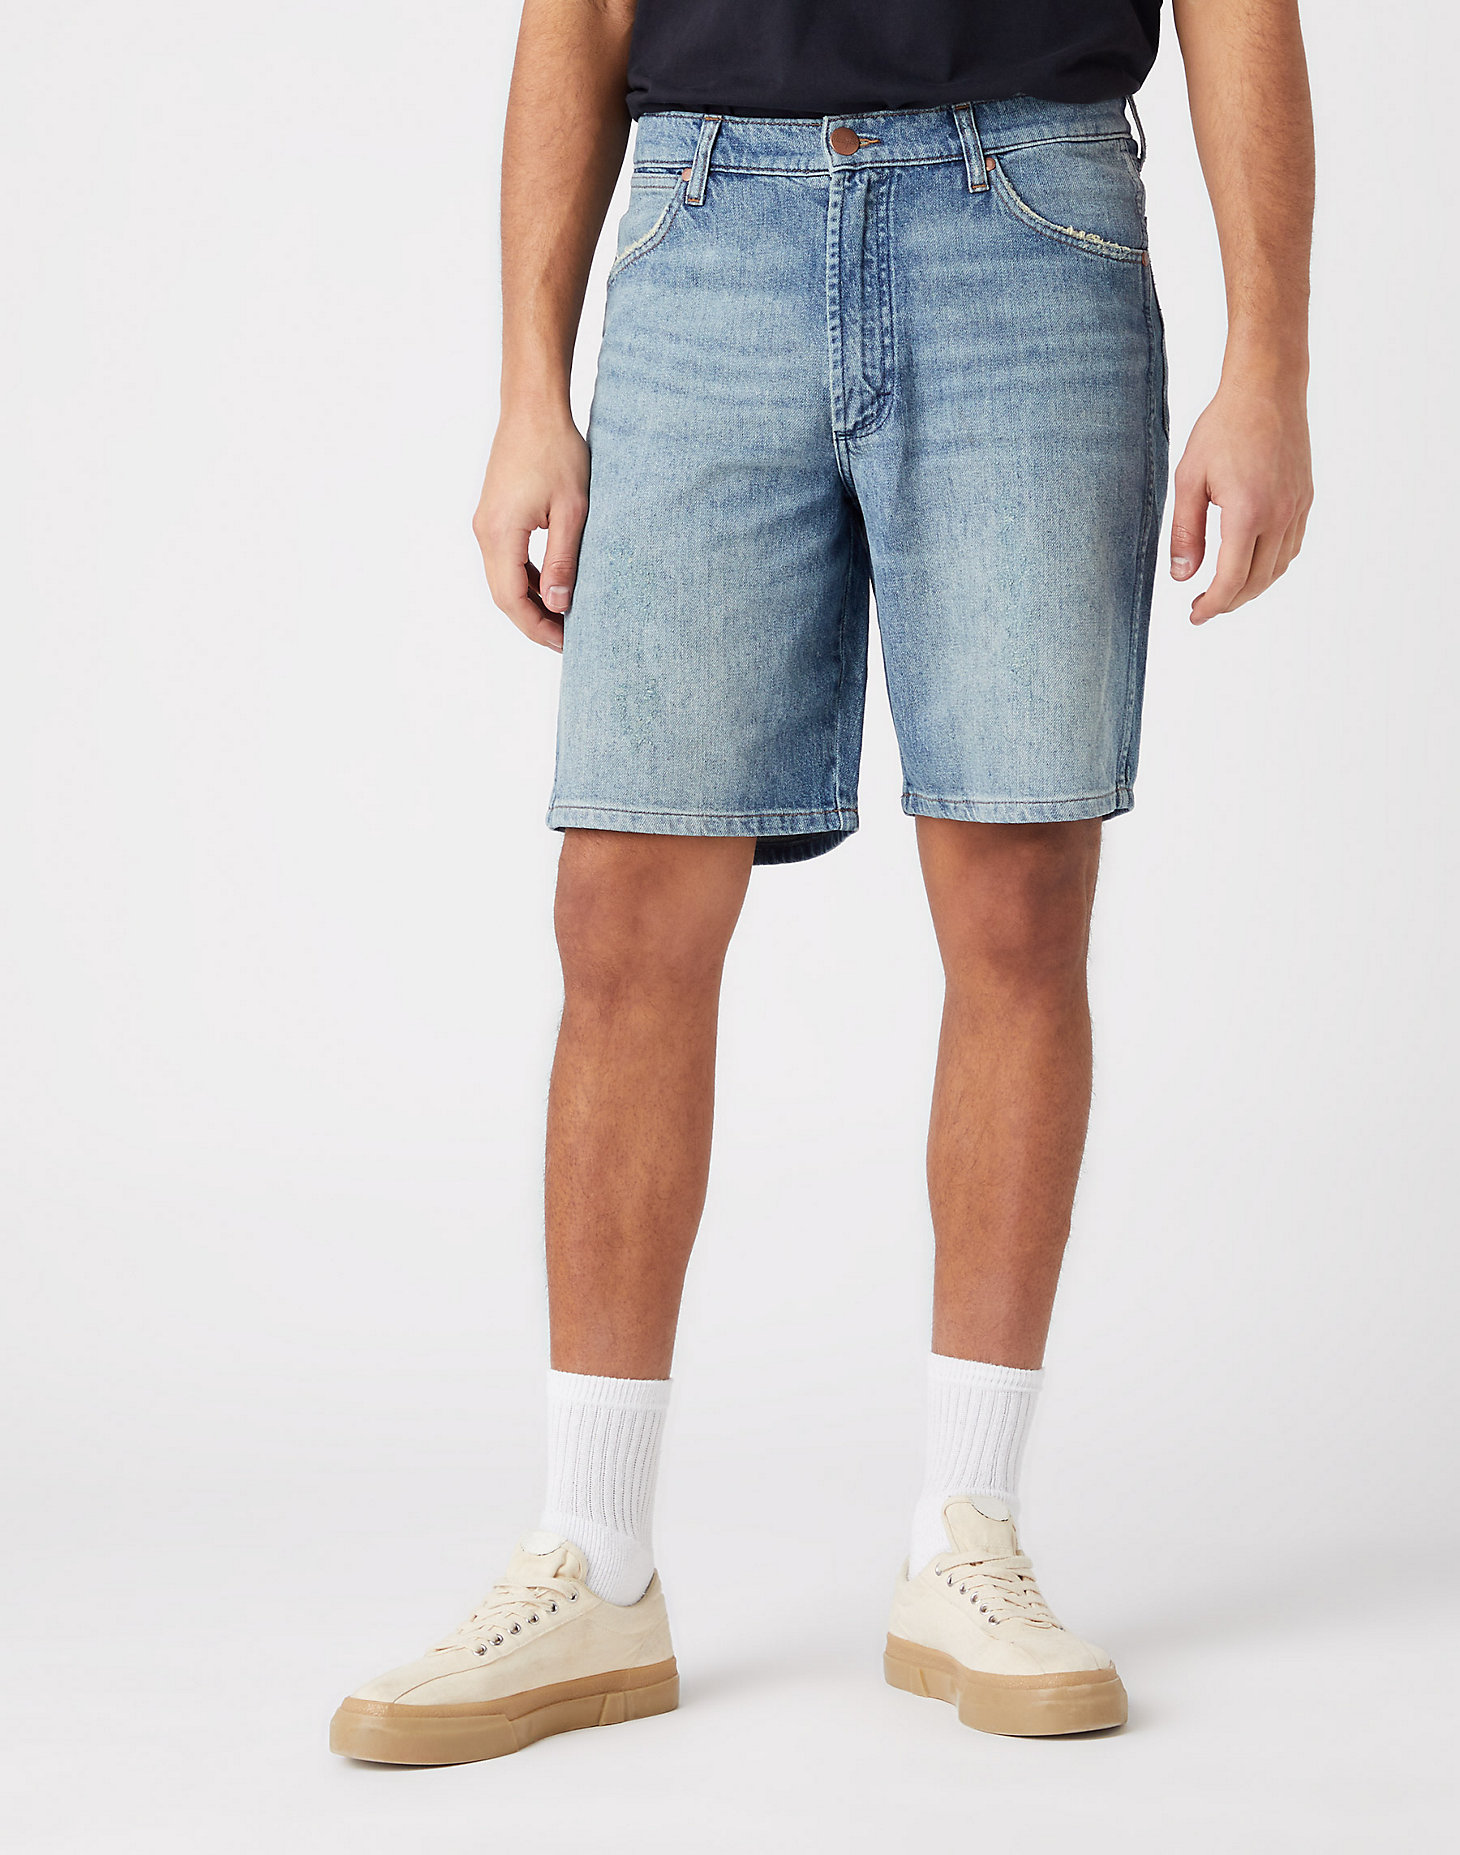 Redding Shorts in Clear Blue main view